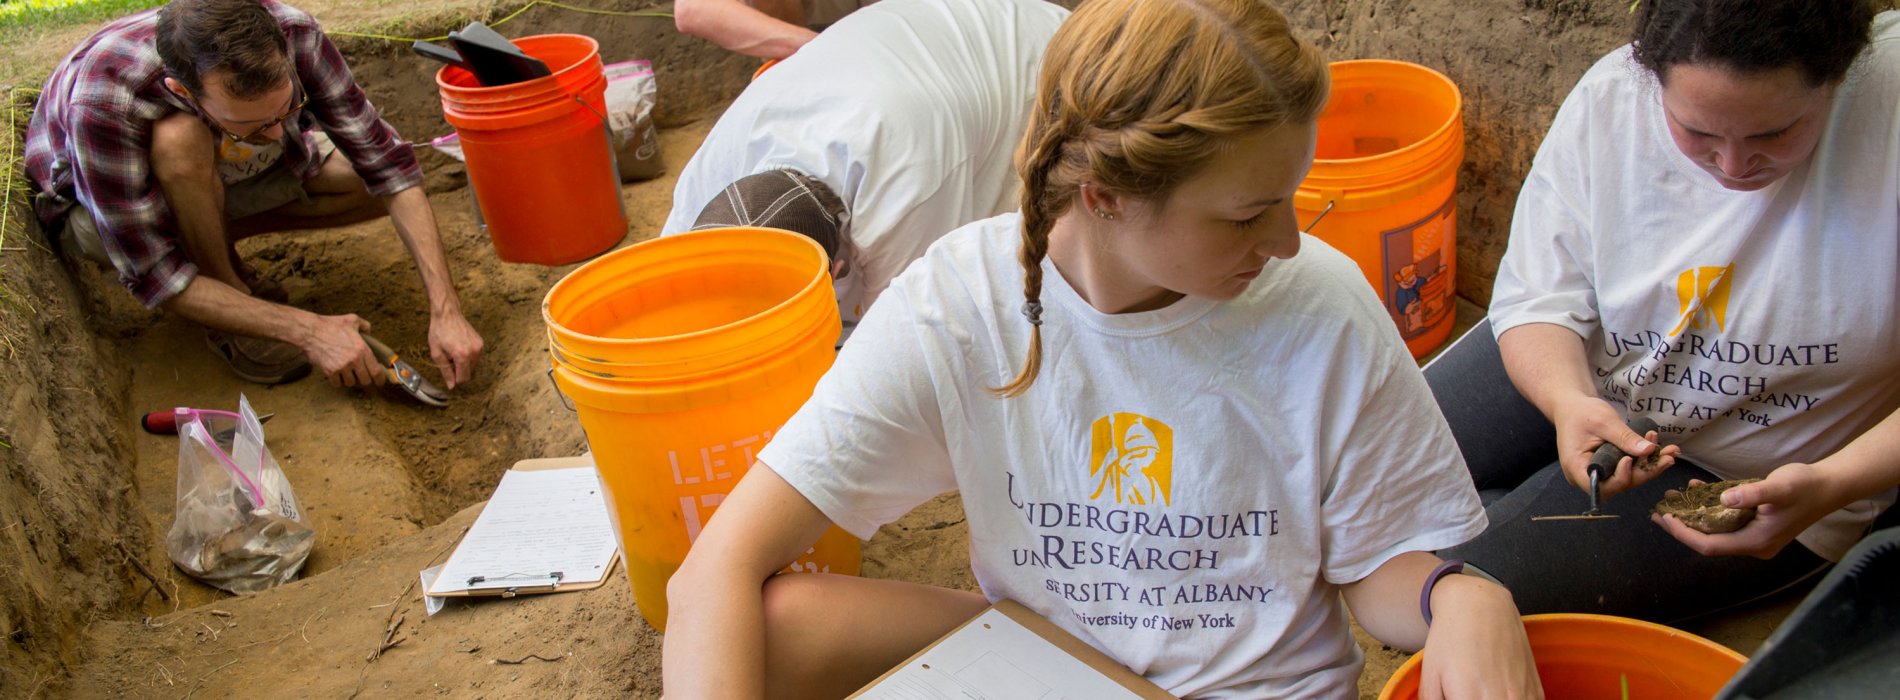 Five students wearing Undergraduate Research t-shirts excavate artifacts at the archaeology dig.